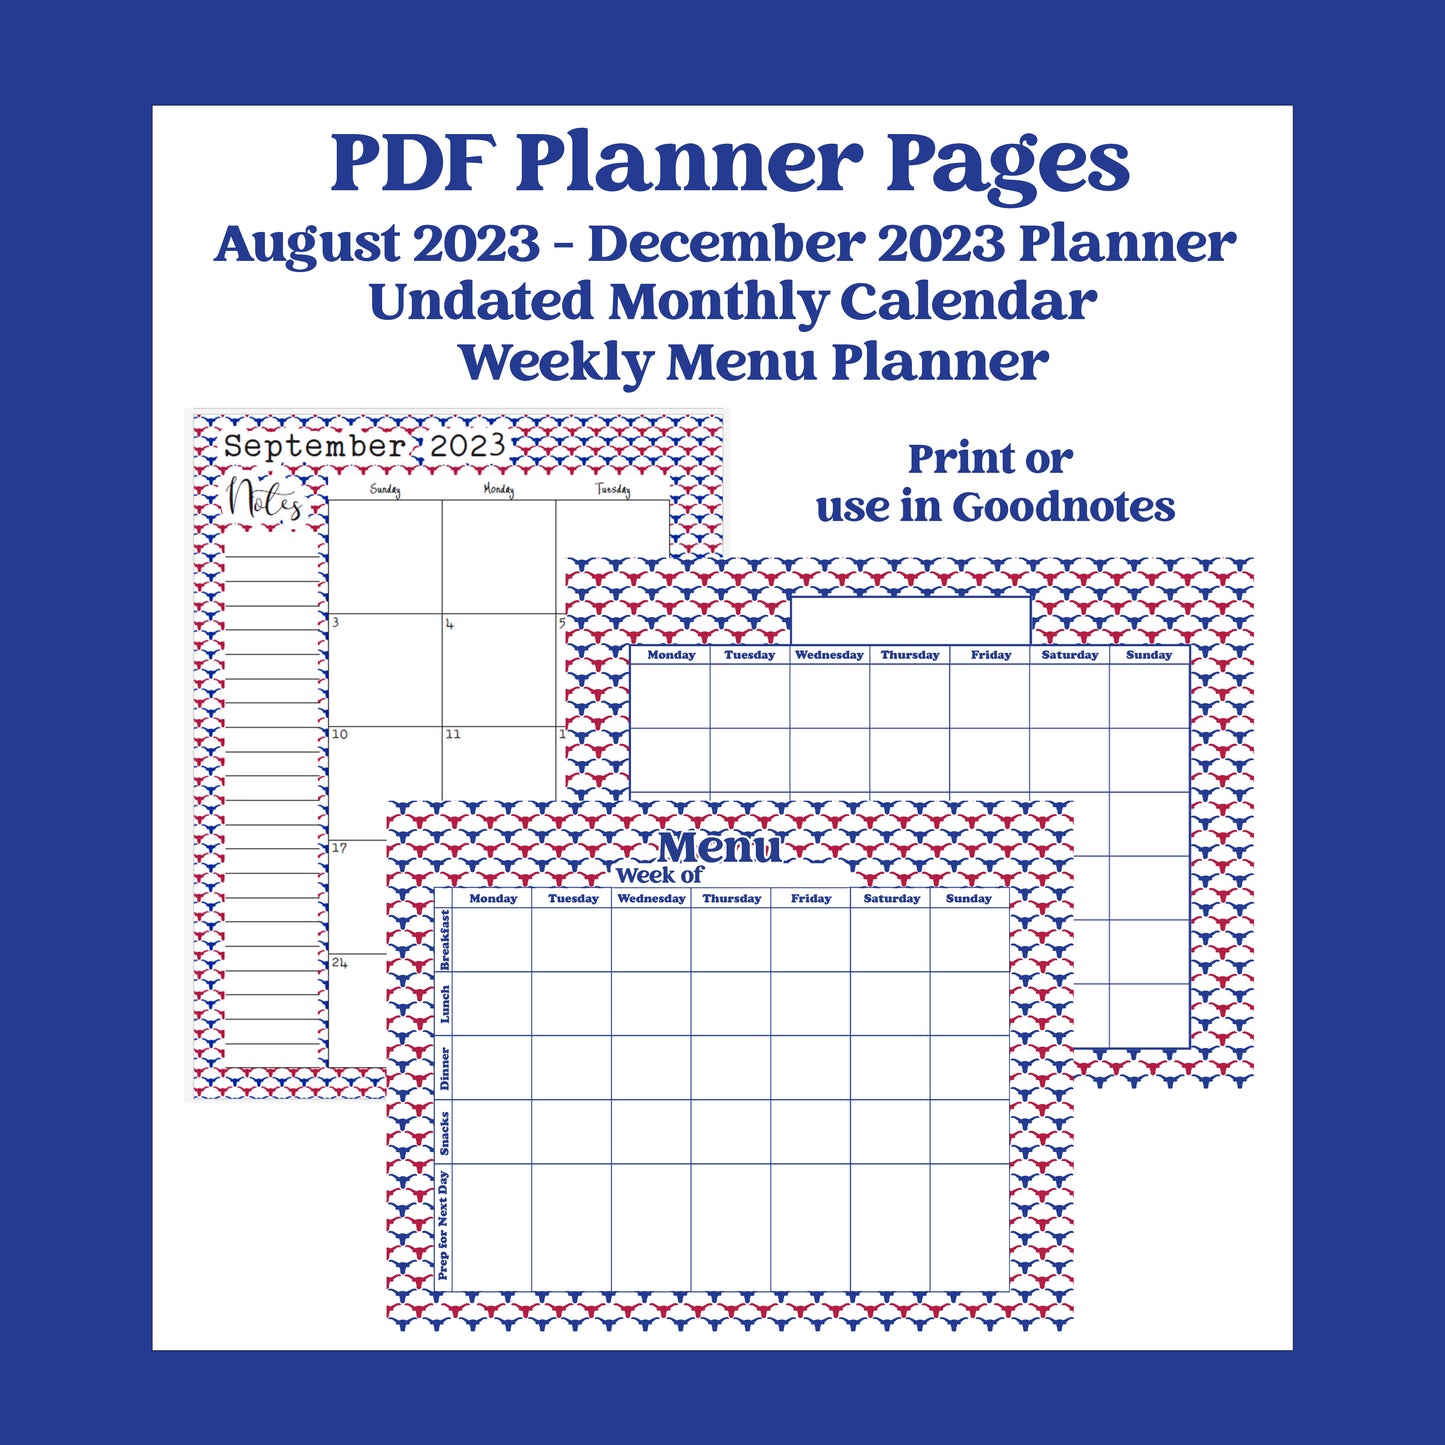 Steer Planner Pages